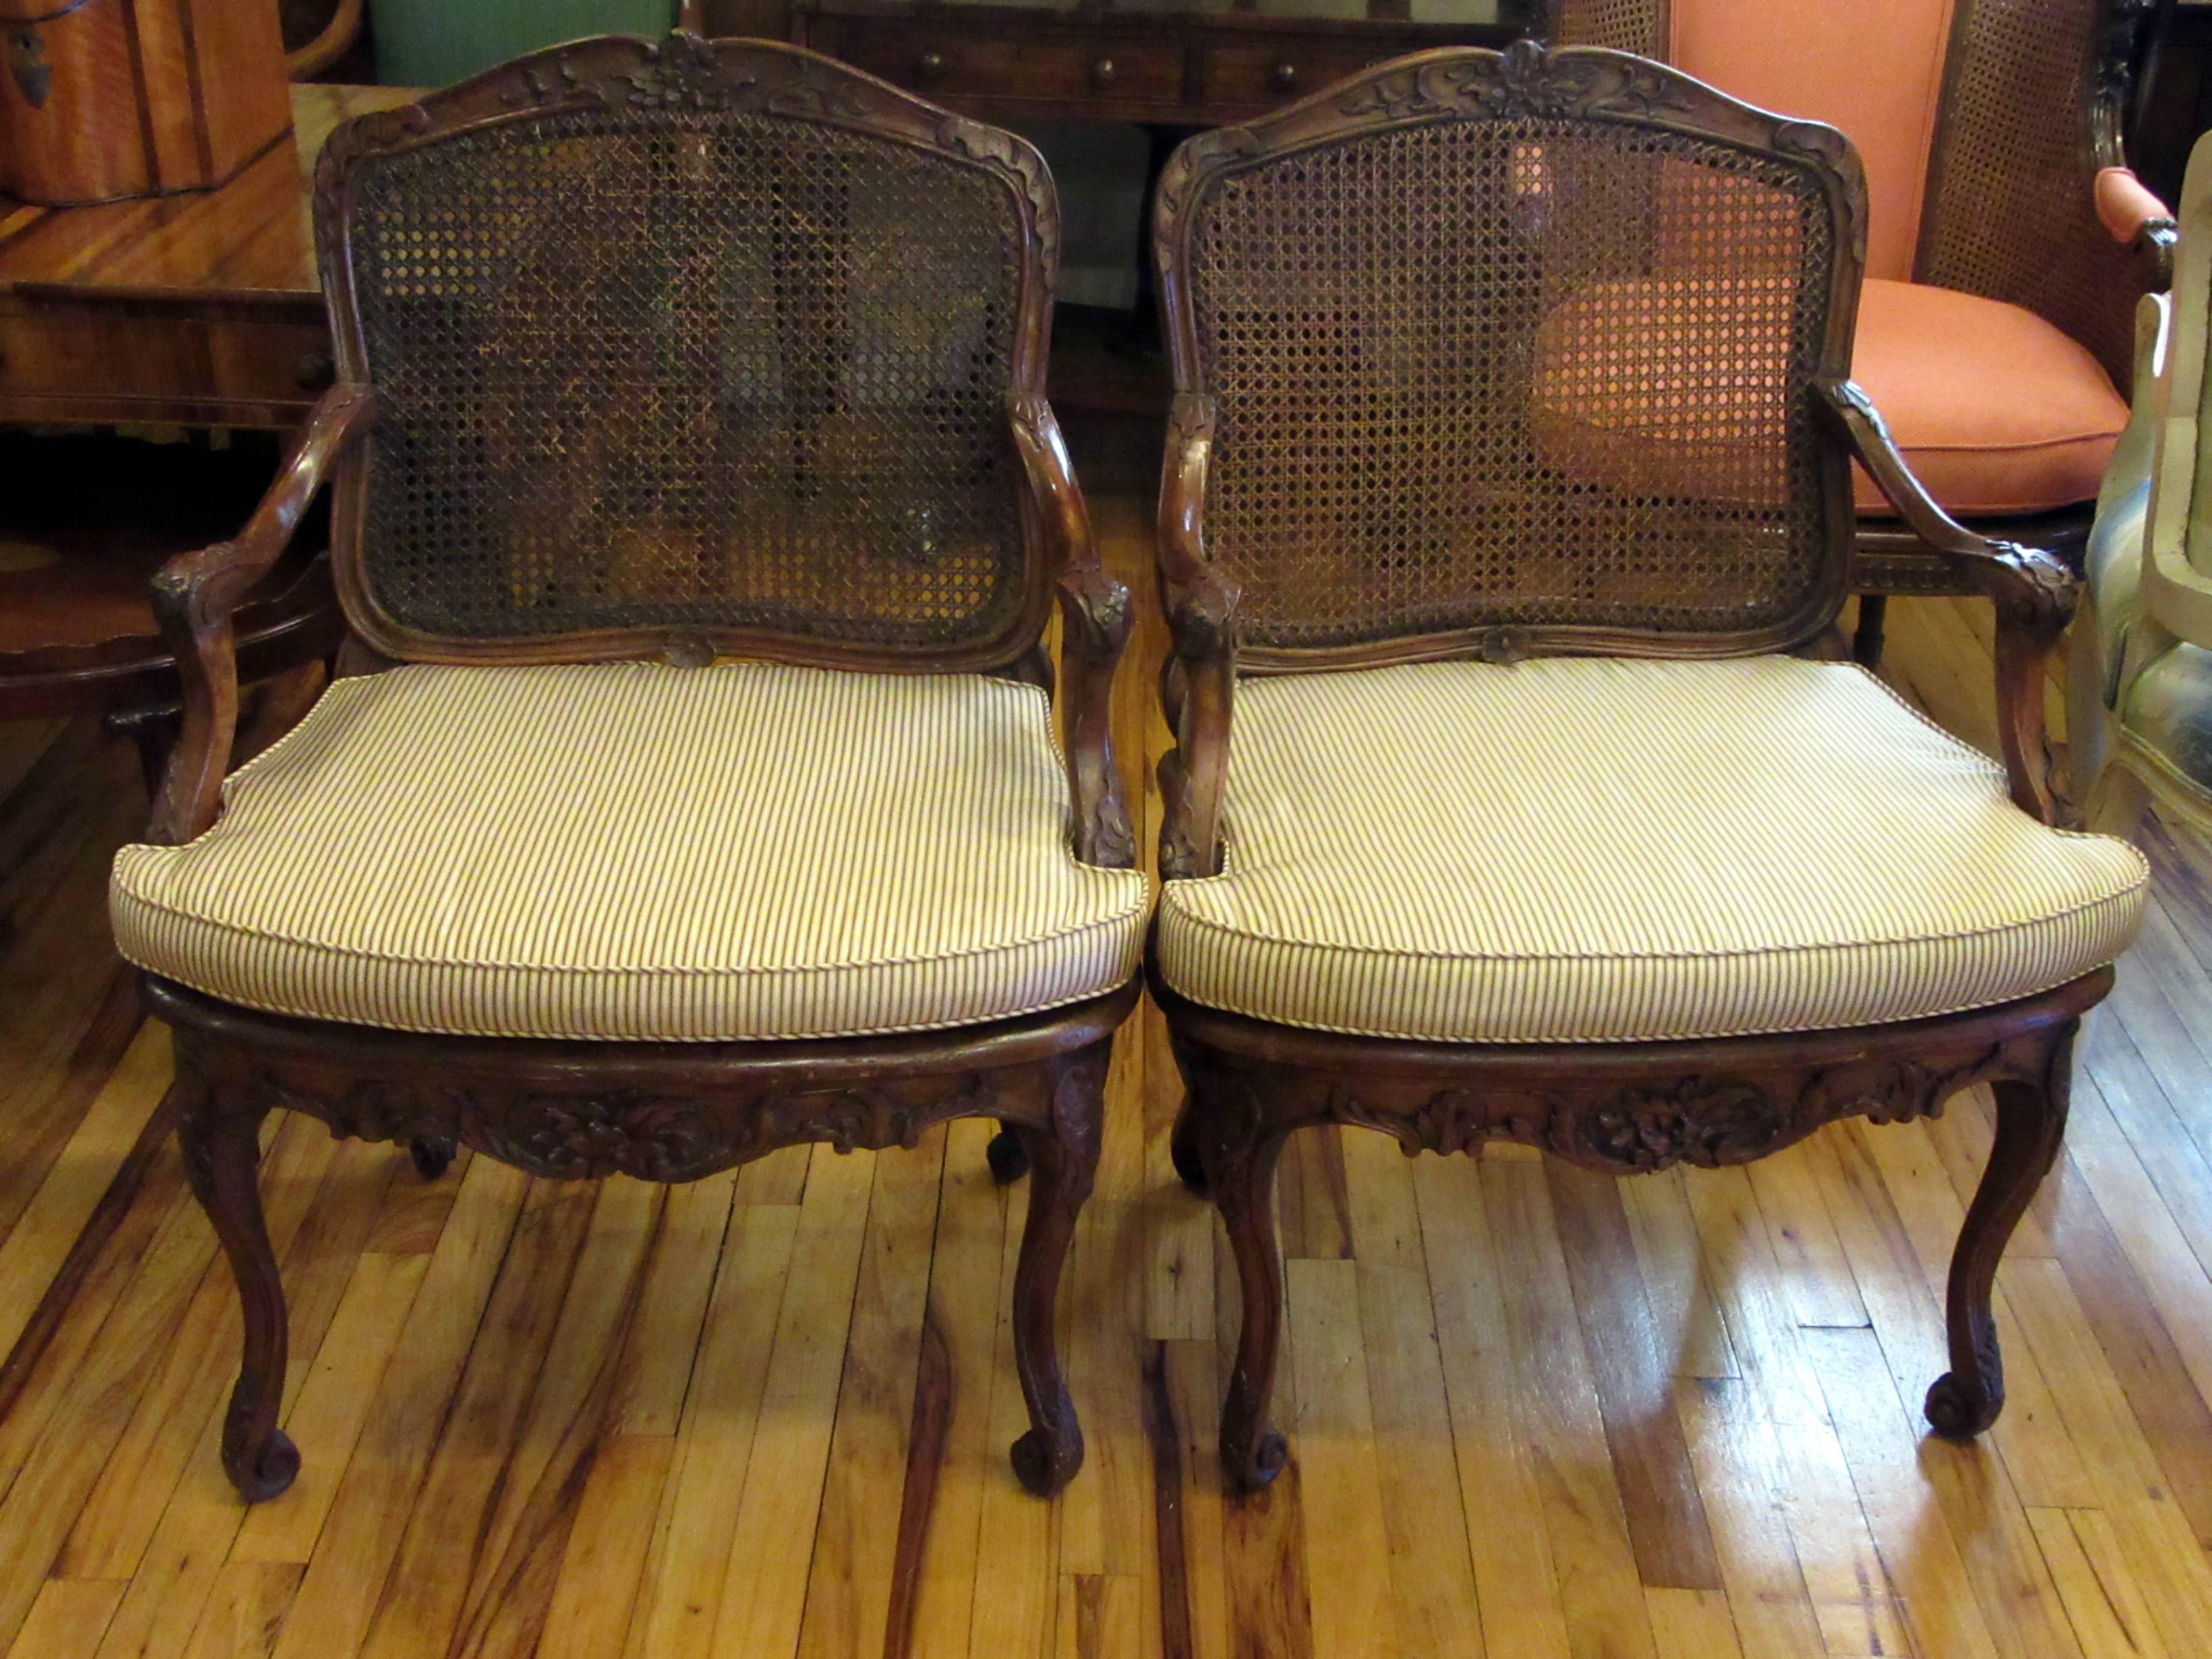 A pair of carved beechwood, caned back and seat armchairs with upholstered cushions. One chair is signed L. Cresson. During the 18th century the Cresson family produced a remarkable number of furniture makers. One of the most prominent Cressons was